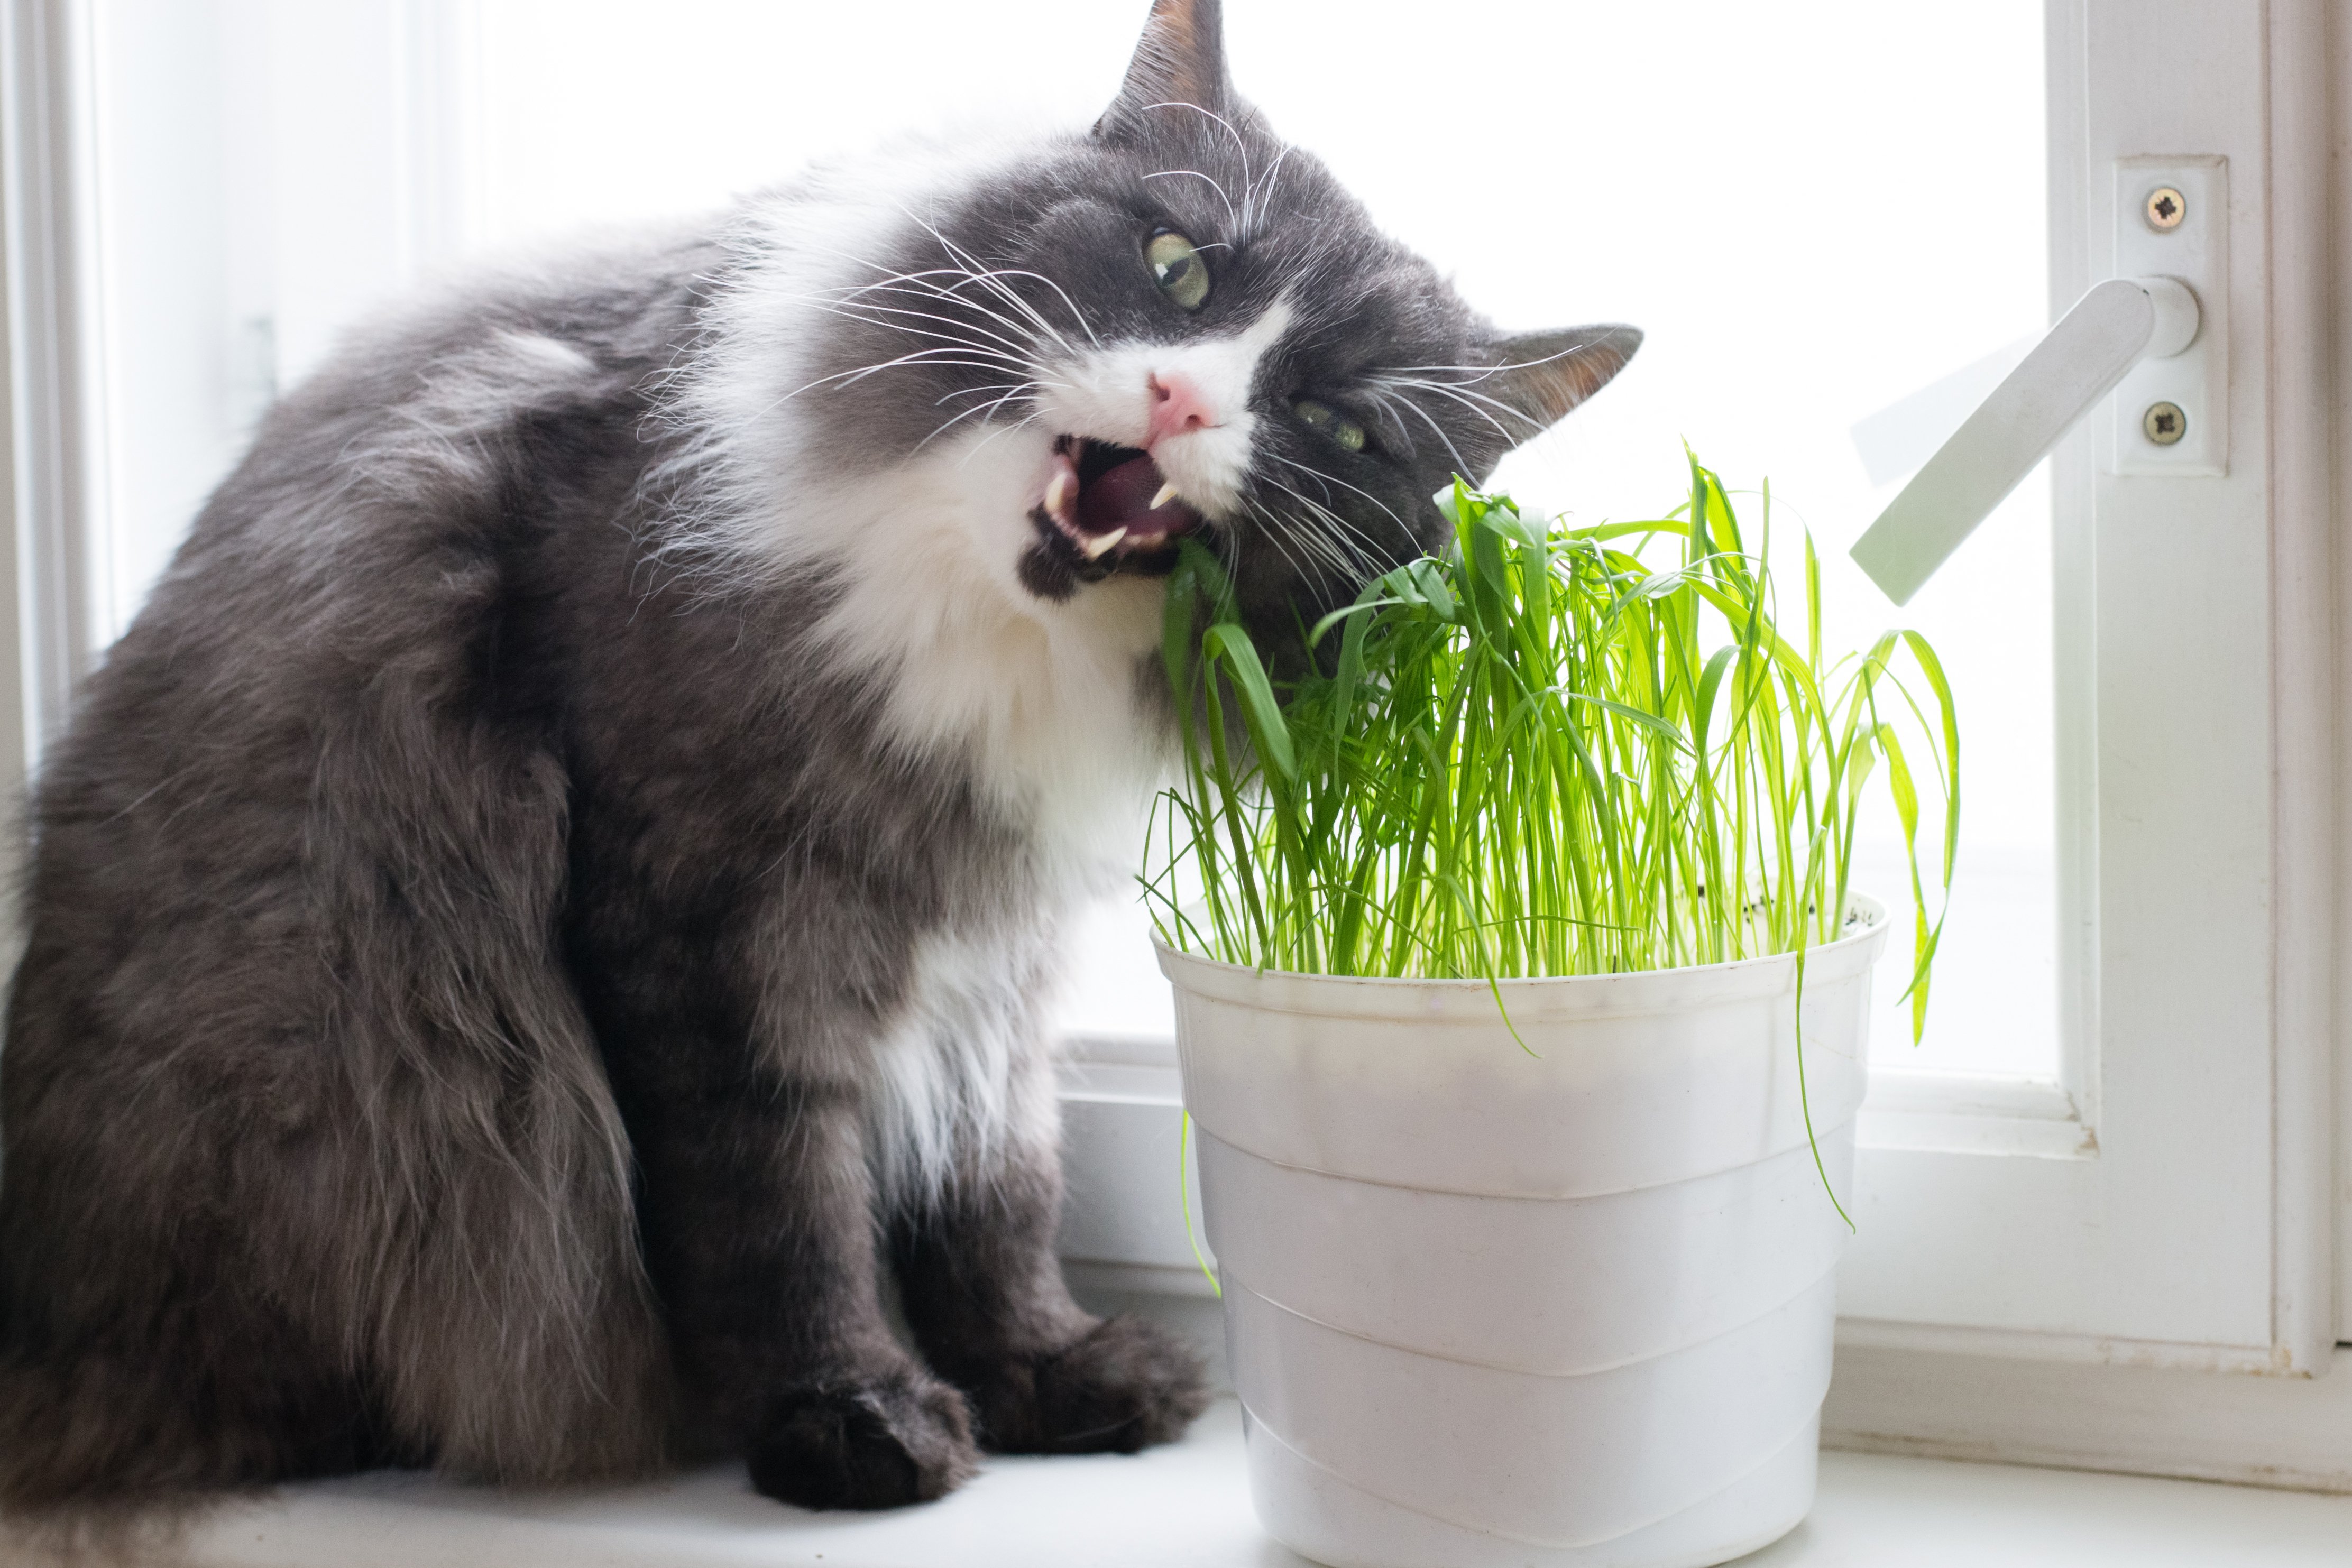 Cat tries to bite house plant | Photo: Shutterstock